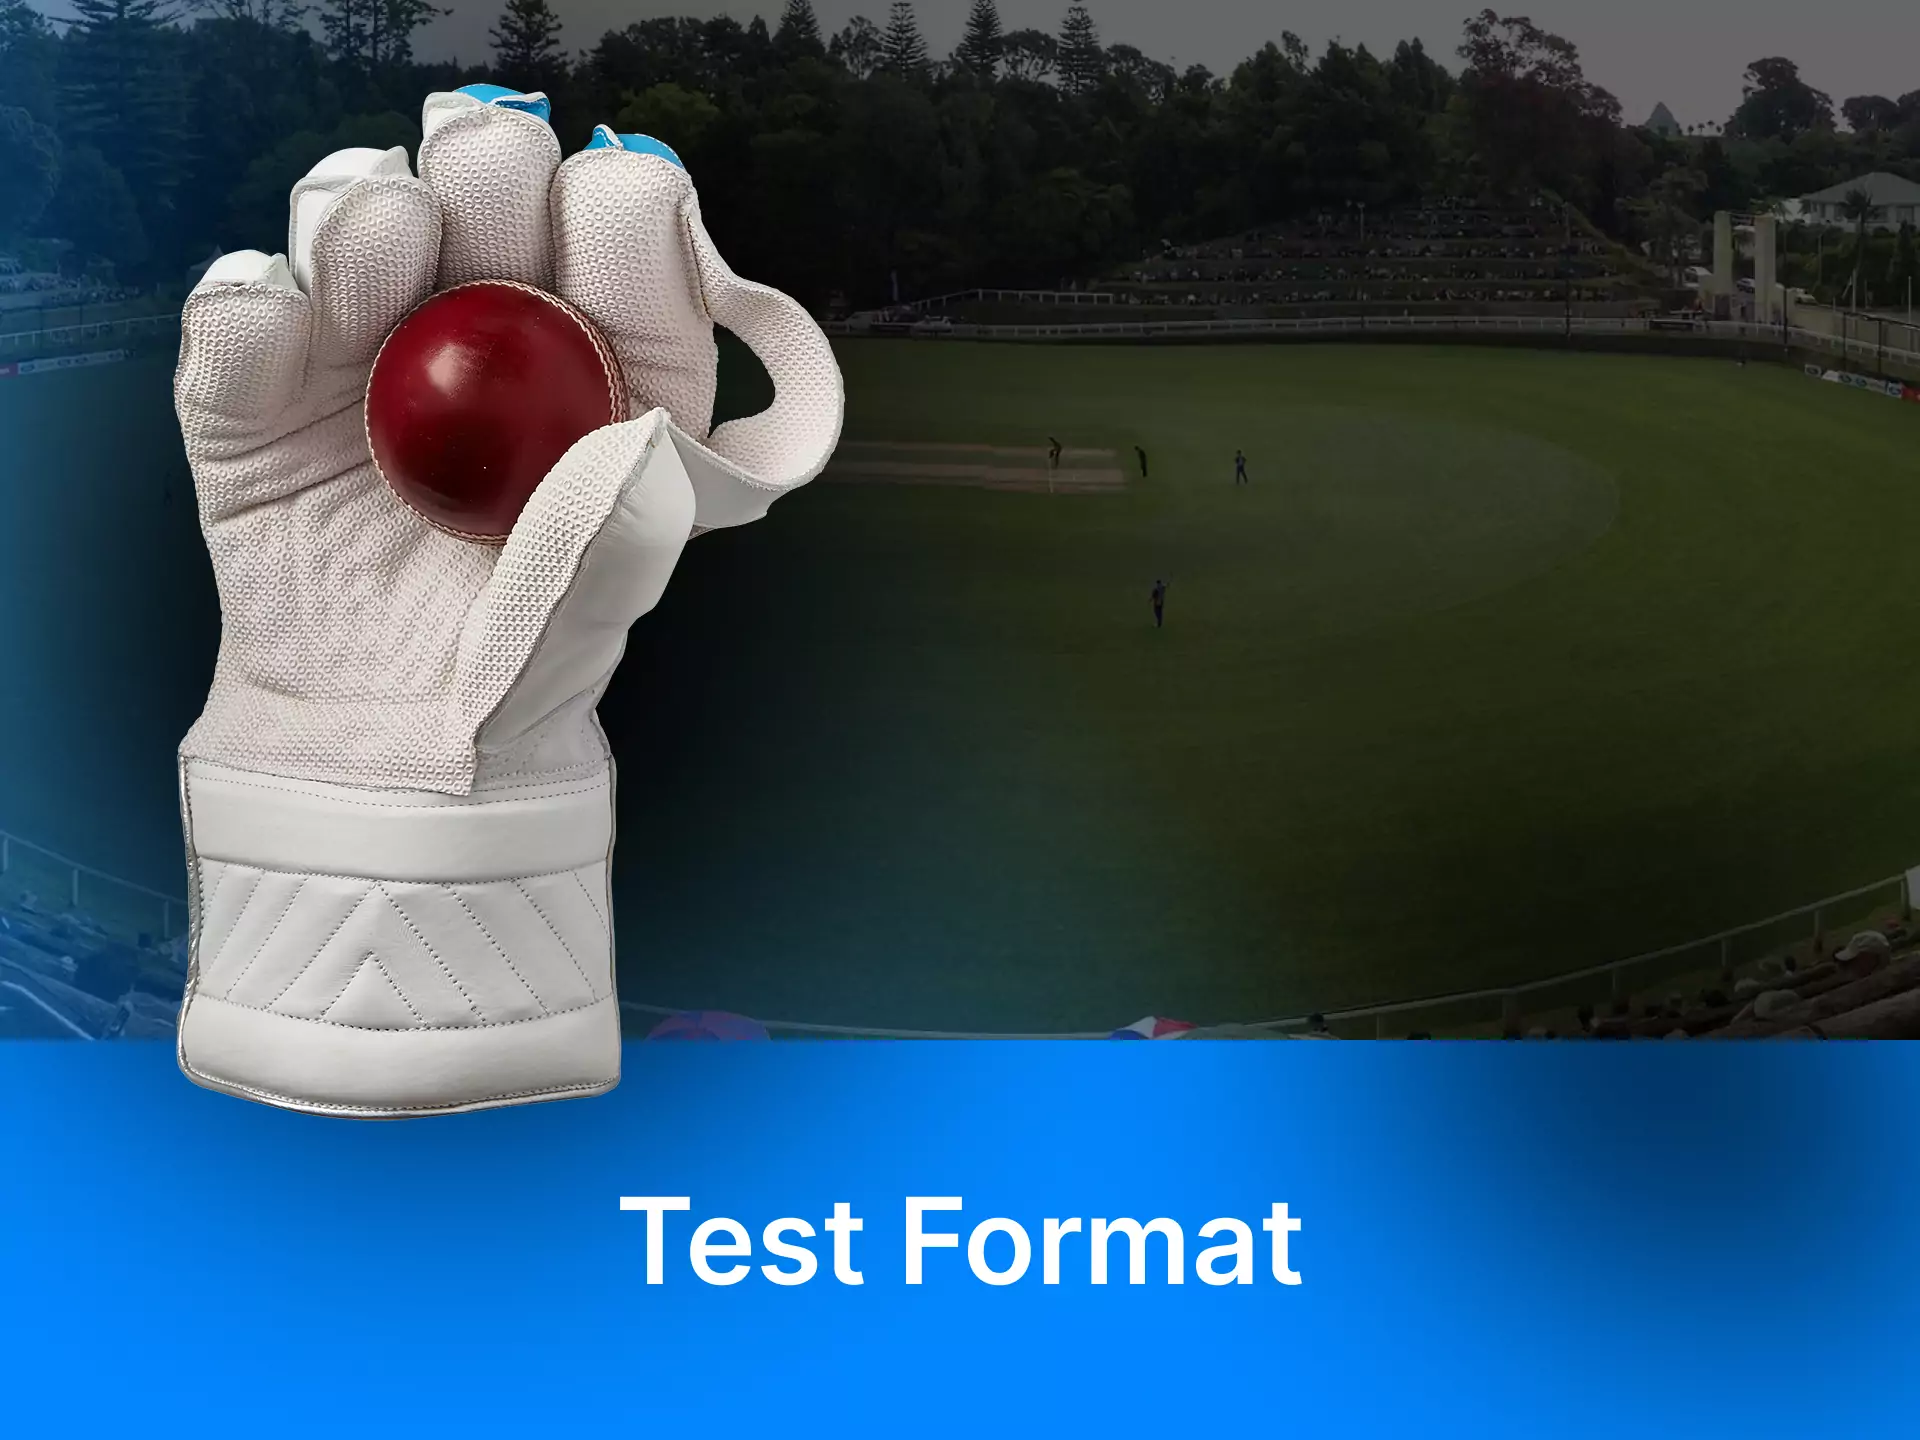 Read on and find out what the test format is.